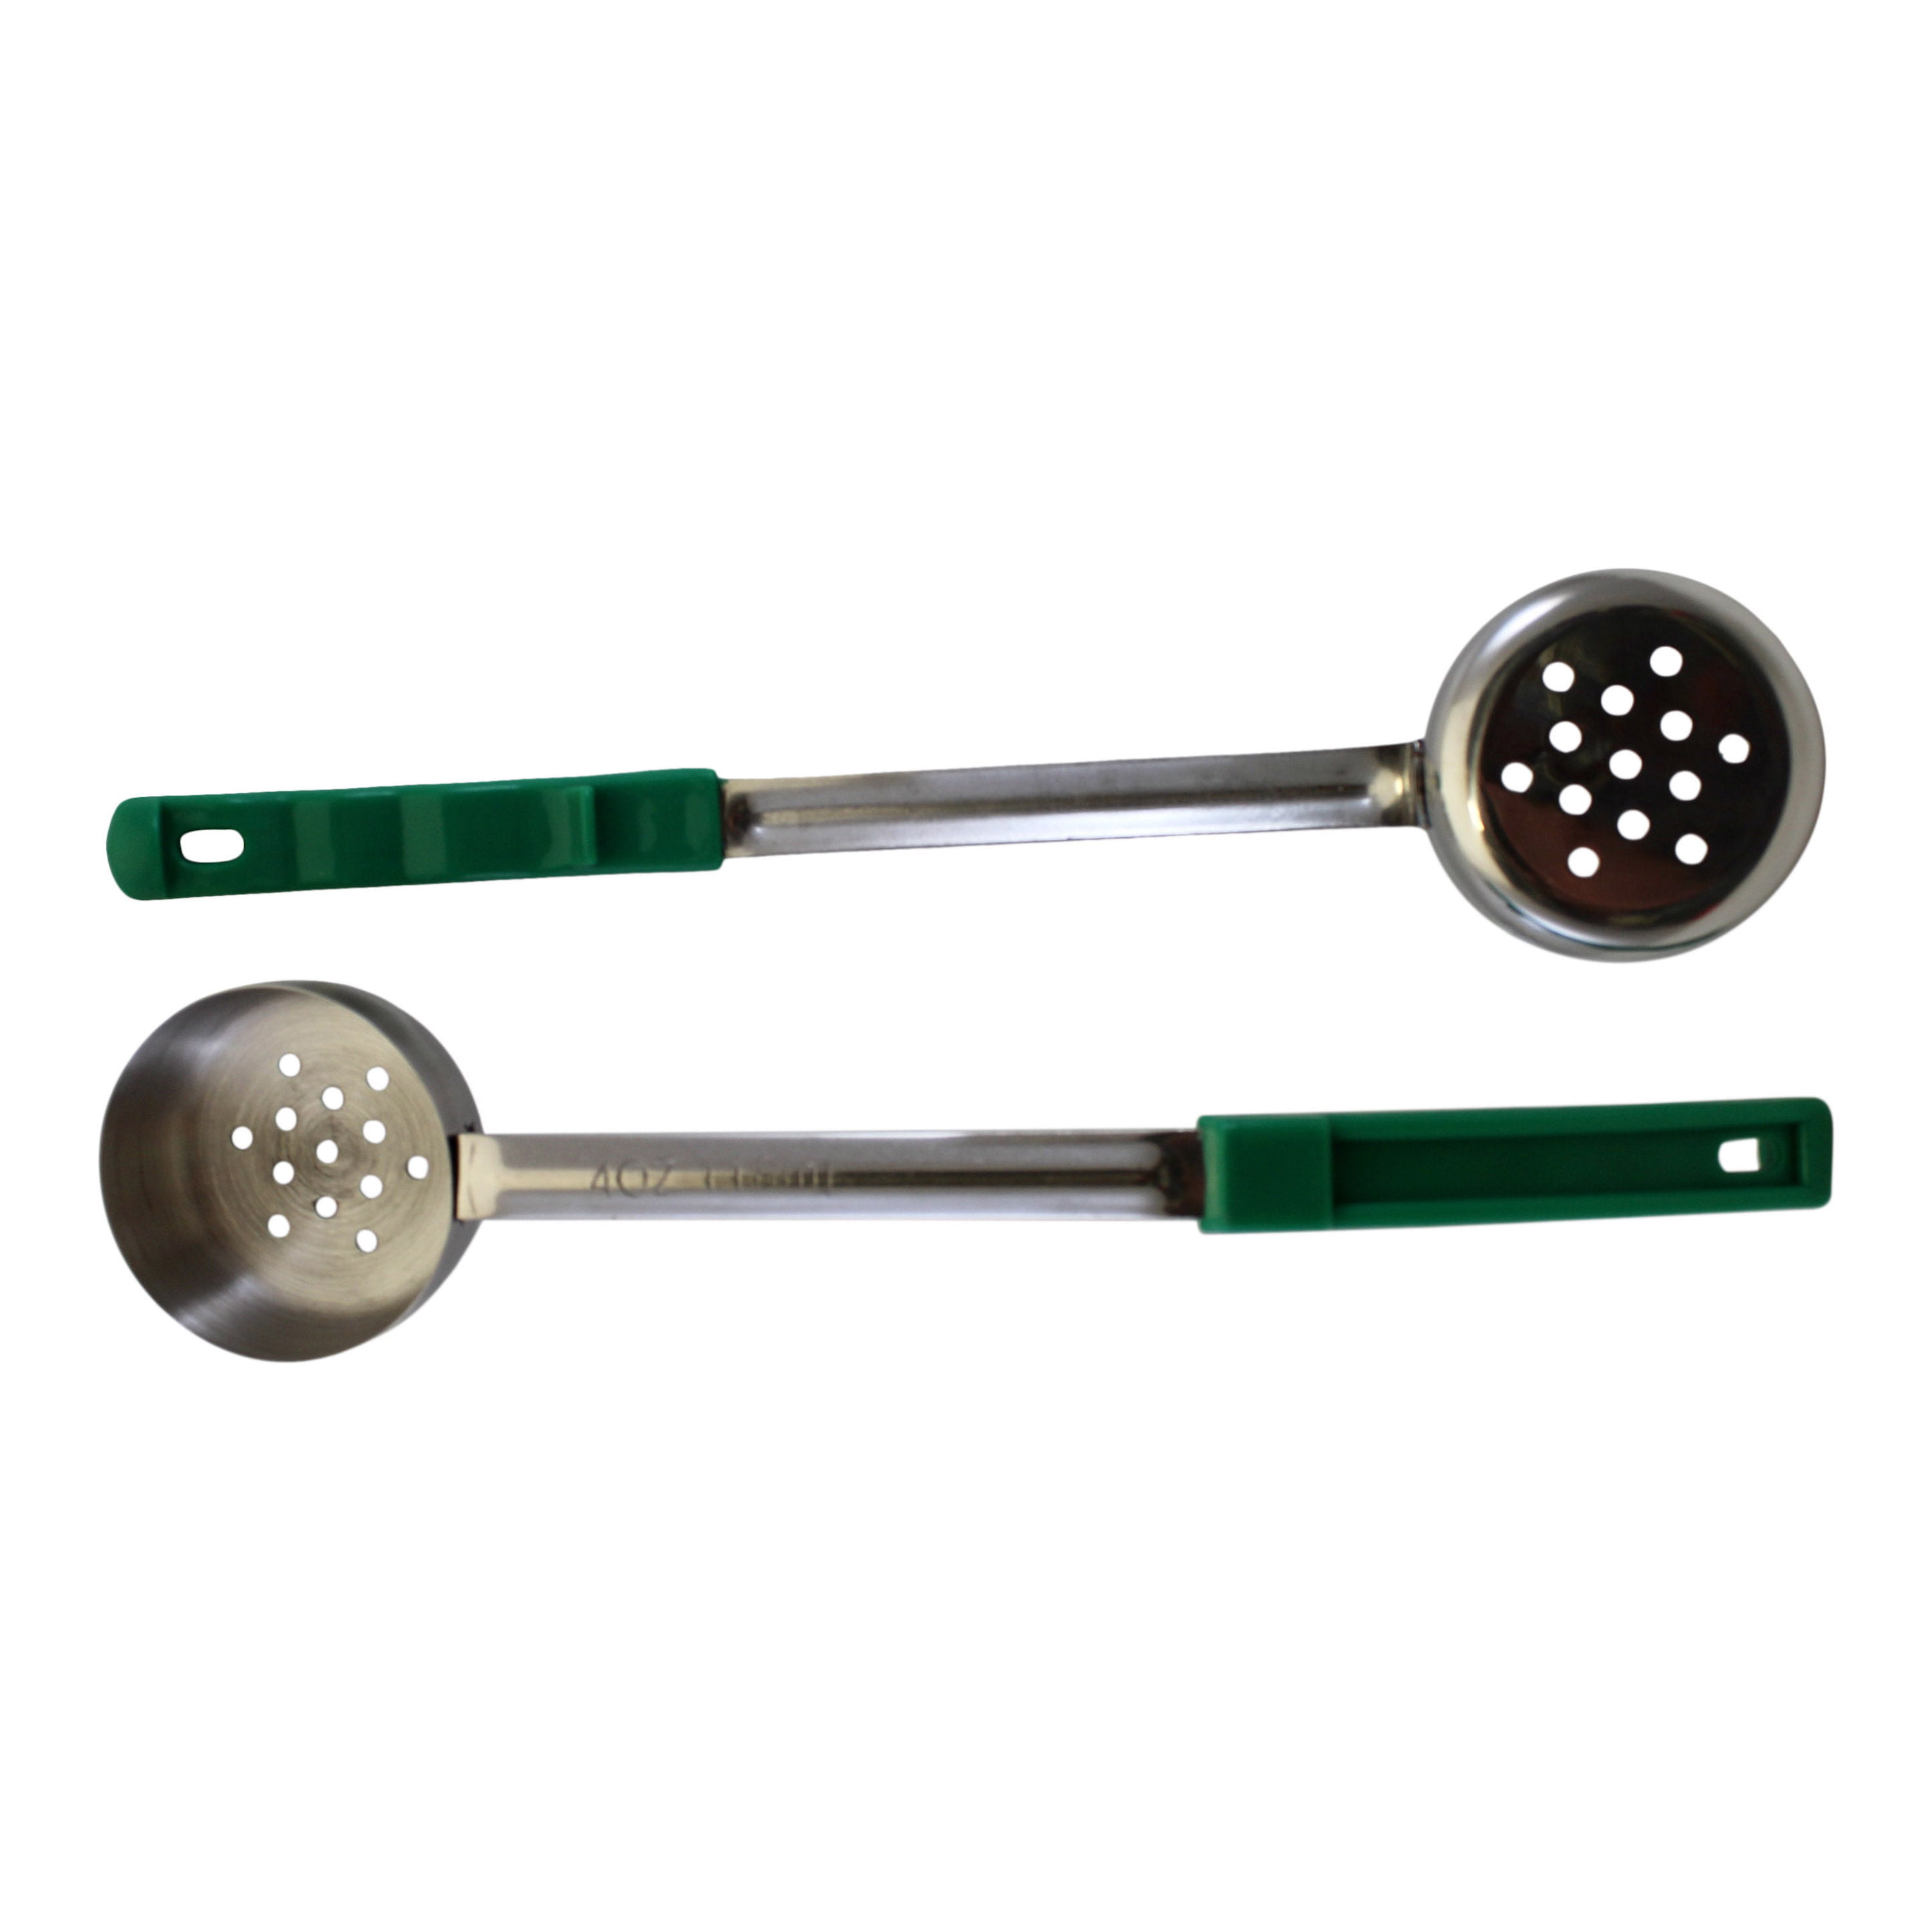 GET 4 oz. (1/2 Cup), Stainless Steel Ladle, Portion Control Serving